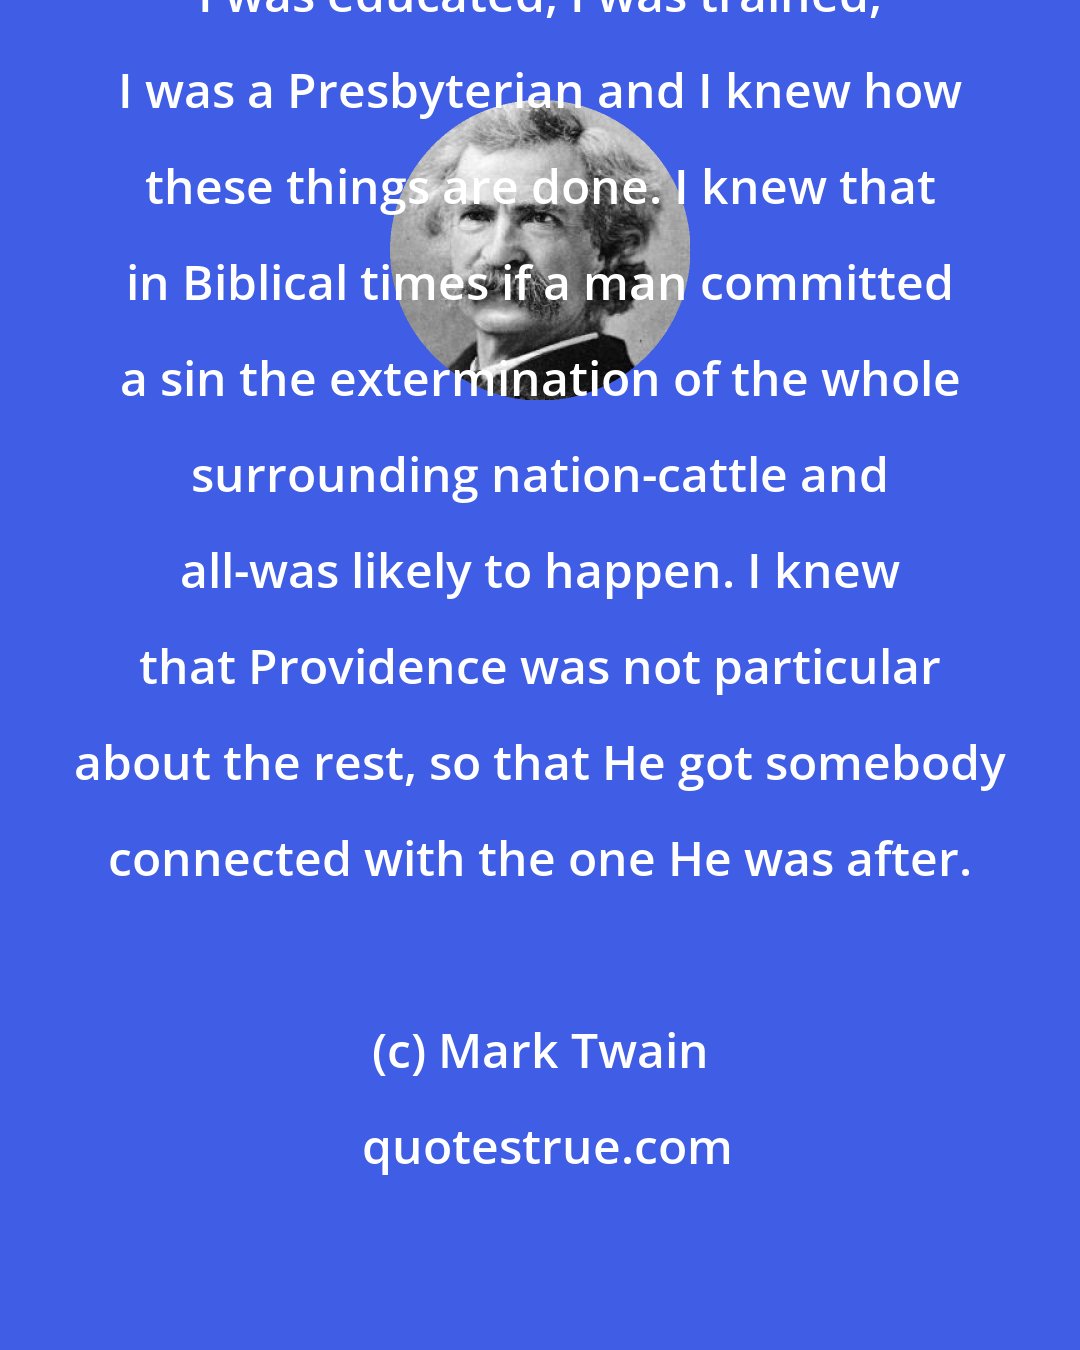 Mark Twain: I was educated, I was trained, I was a Presbyterian and I knew how these things are done. I knew that in Biblical times if a man committed a sin the extermination of the whole surrounding nation-cattle and all-was likely to happen. I knew that Providence was not particular about the rest, so that He got somebody connected with the one He was after.